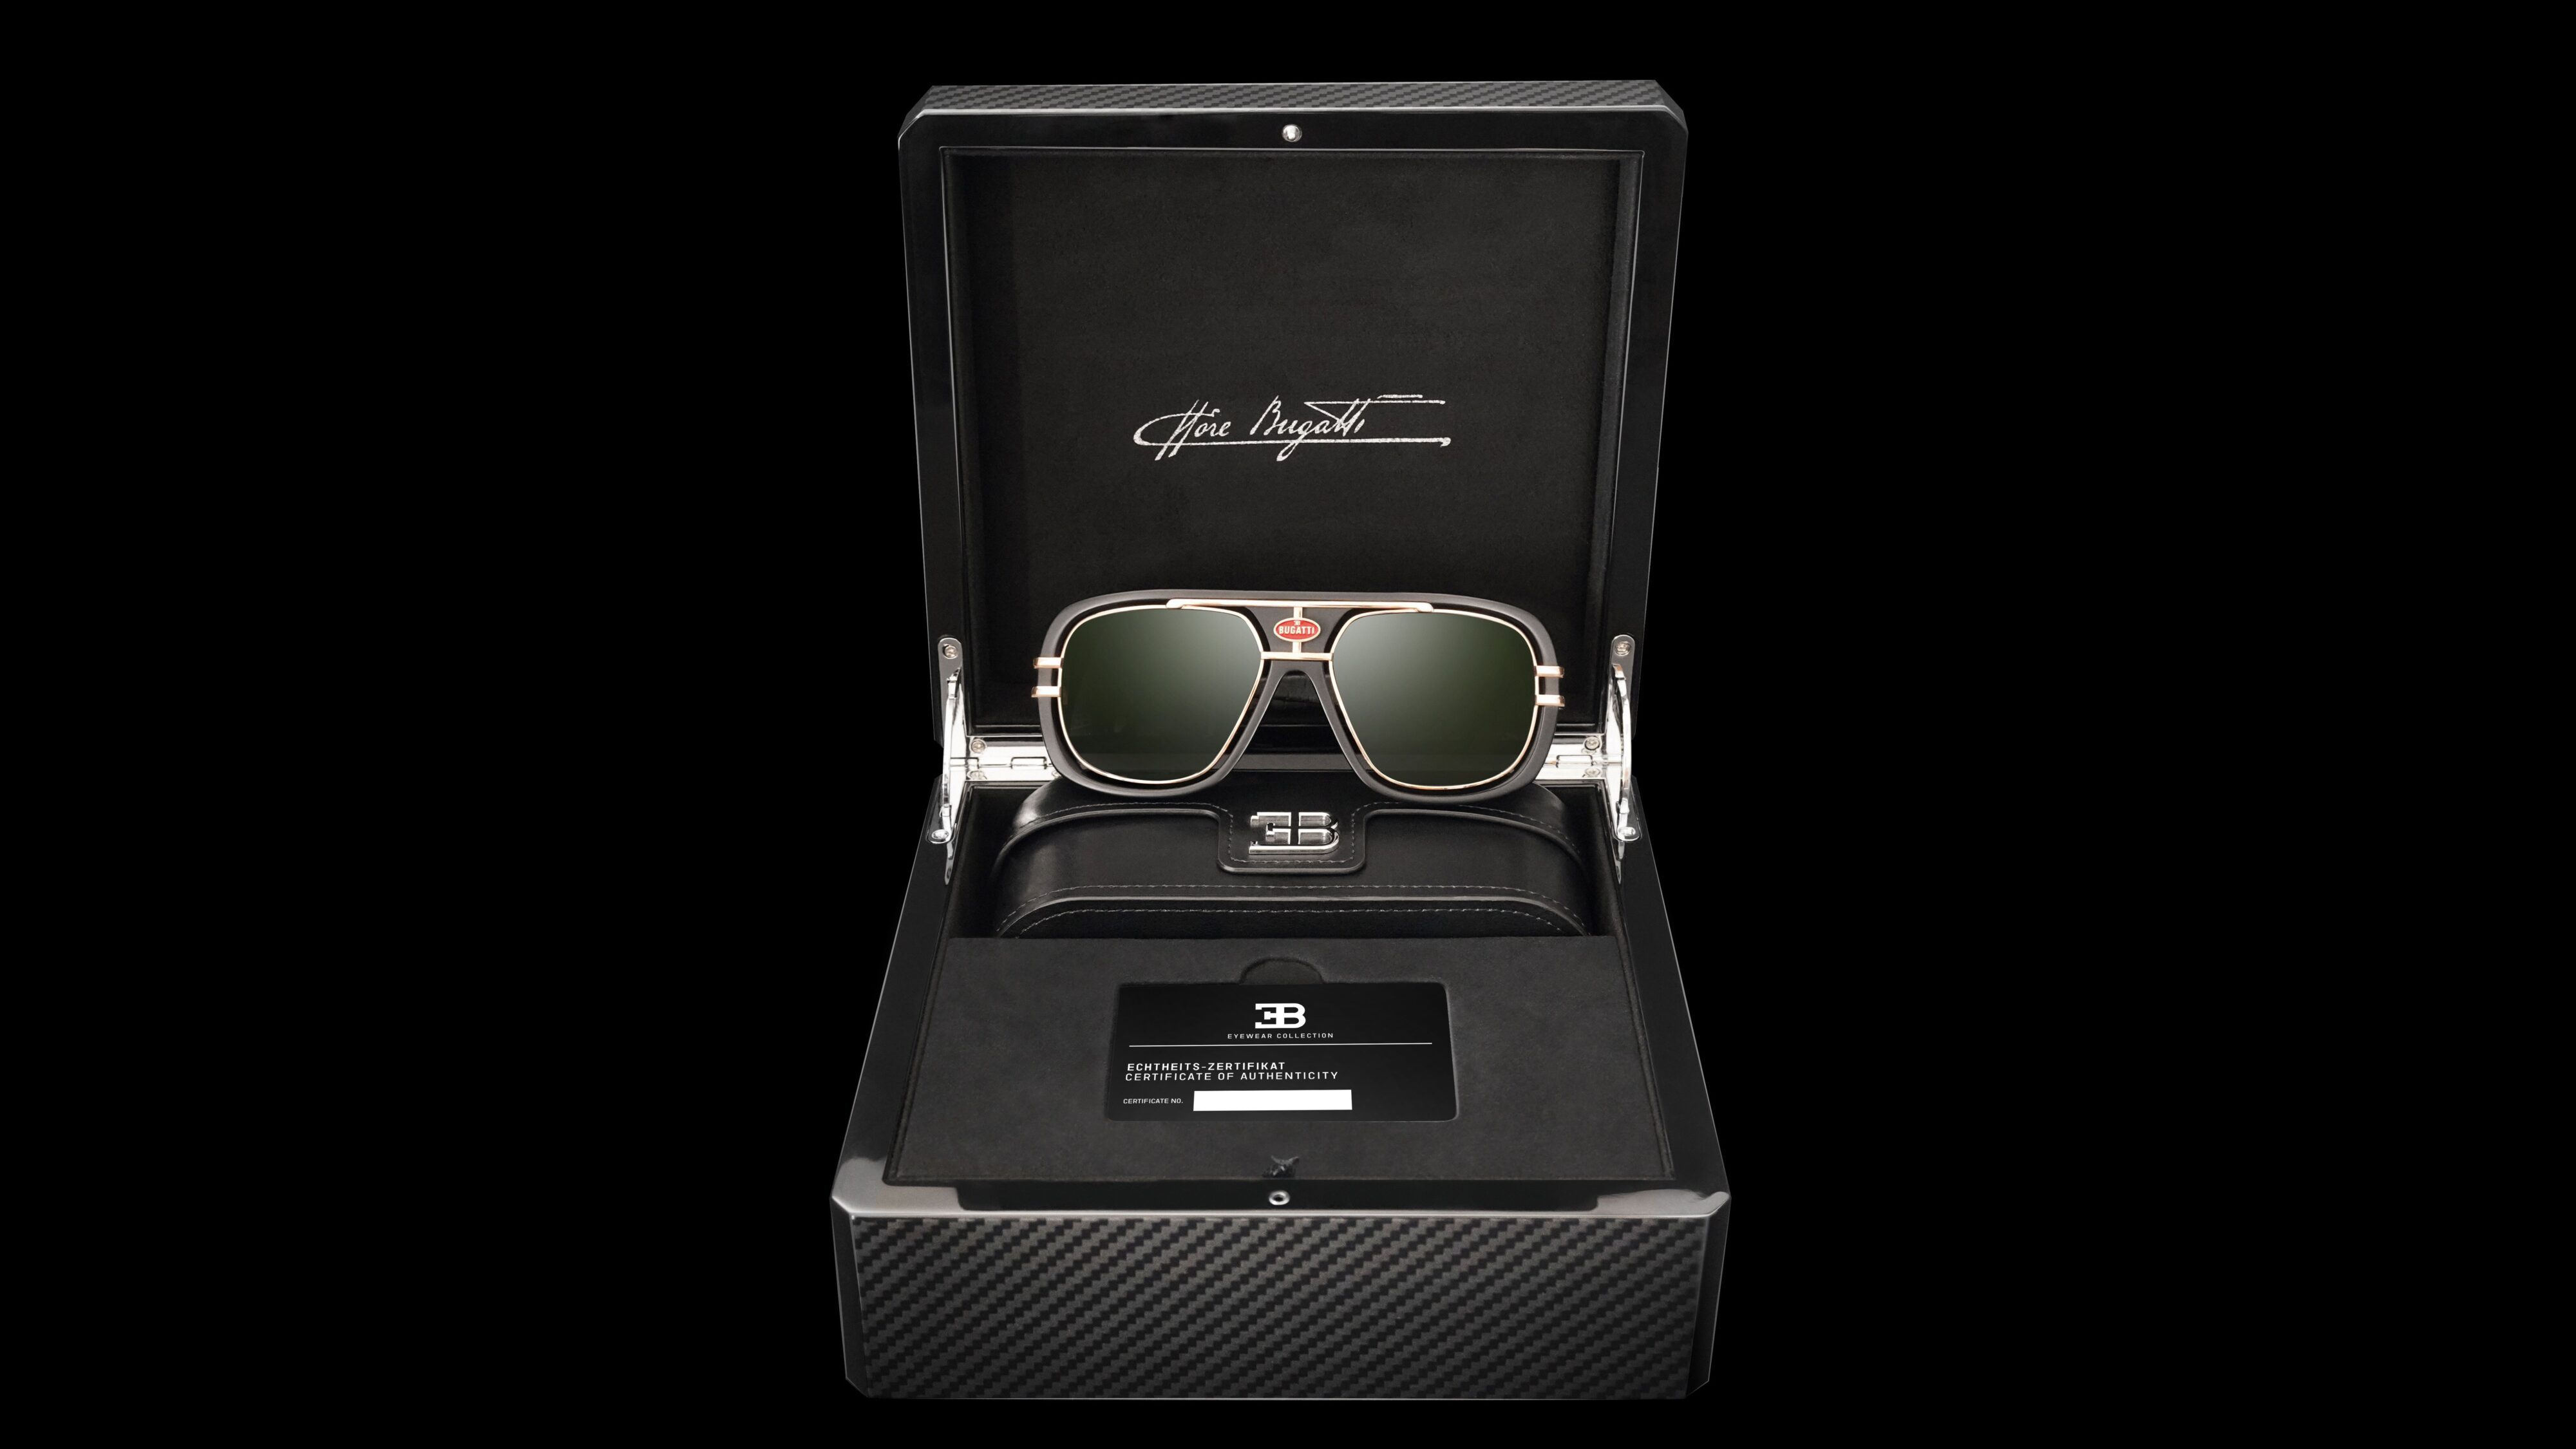 The Hyperluxury Package that comes with piece 07 from the Bugatti Eyewear Collection